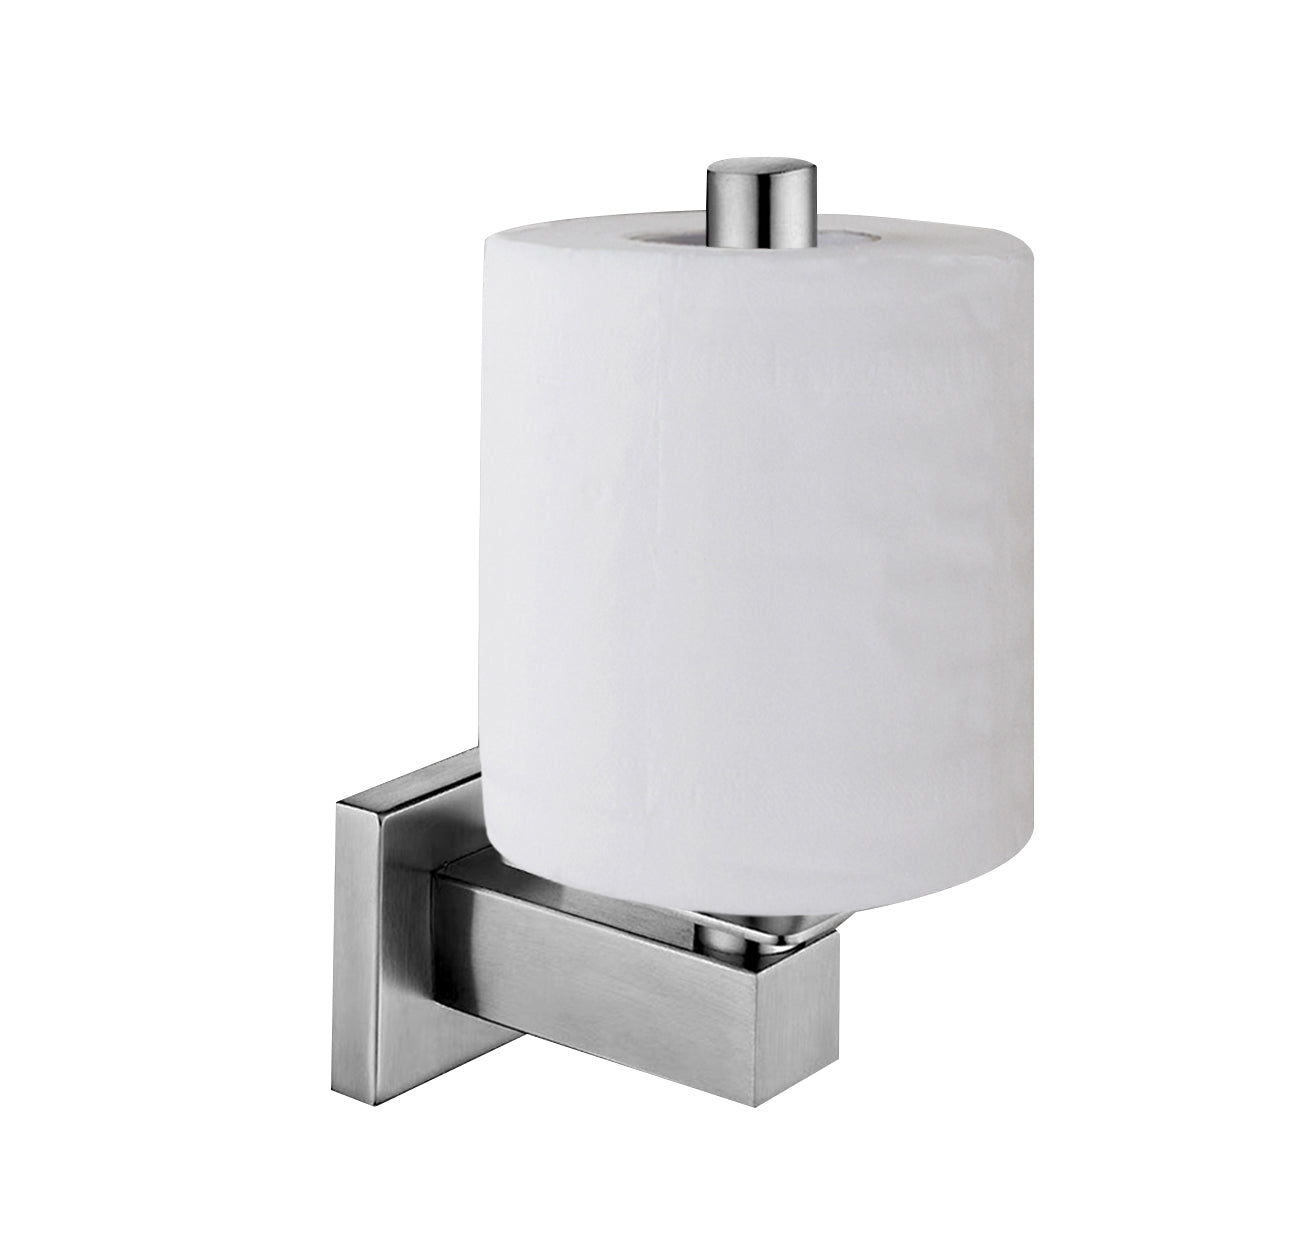 European Style Adhesive Vertical Paper Towel Holder Stainless Steel Wall  Mount Bathroom Kitchen Toilet Tissue Roll